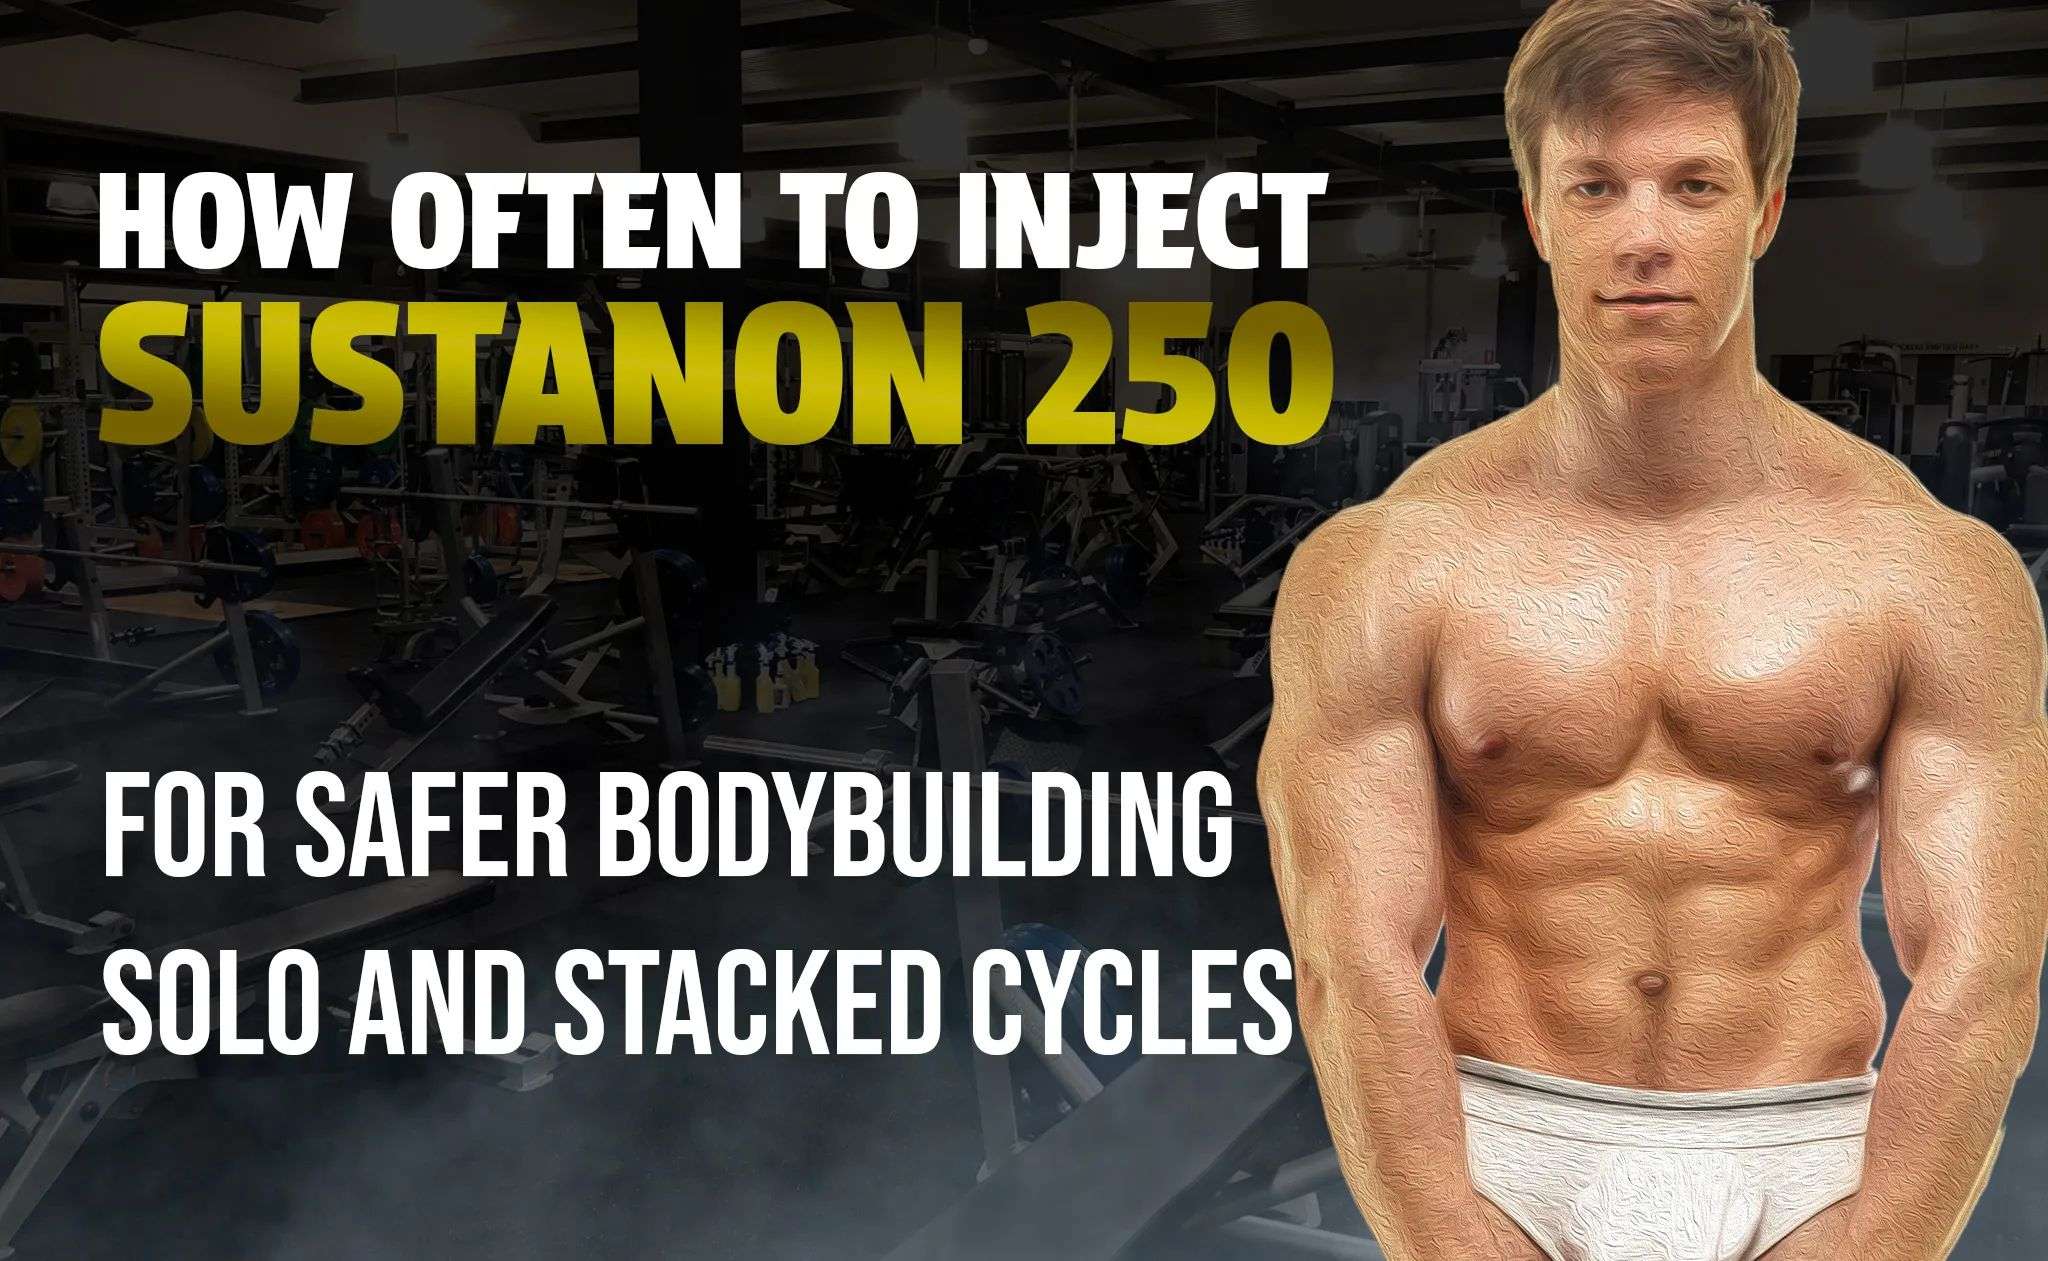 How Often to Inject Sustanon 250 for Safer Bodybuilding Solo and Stacked Cycles